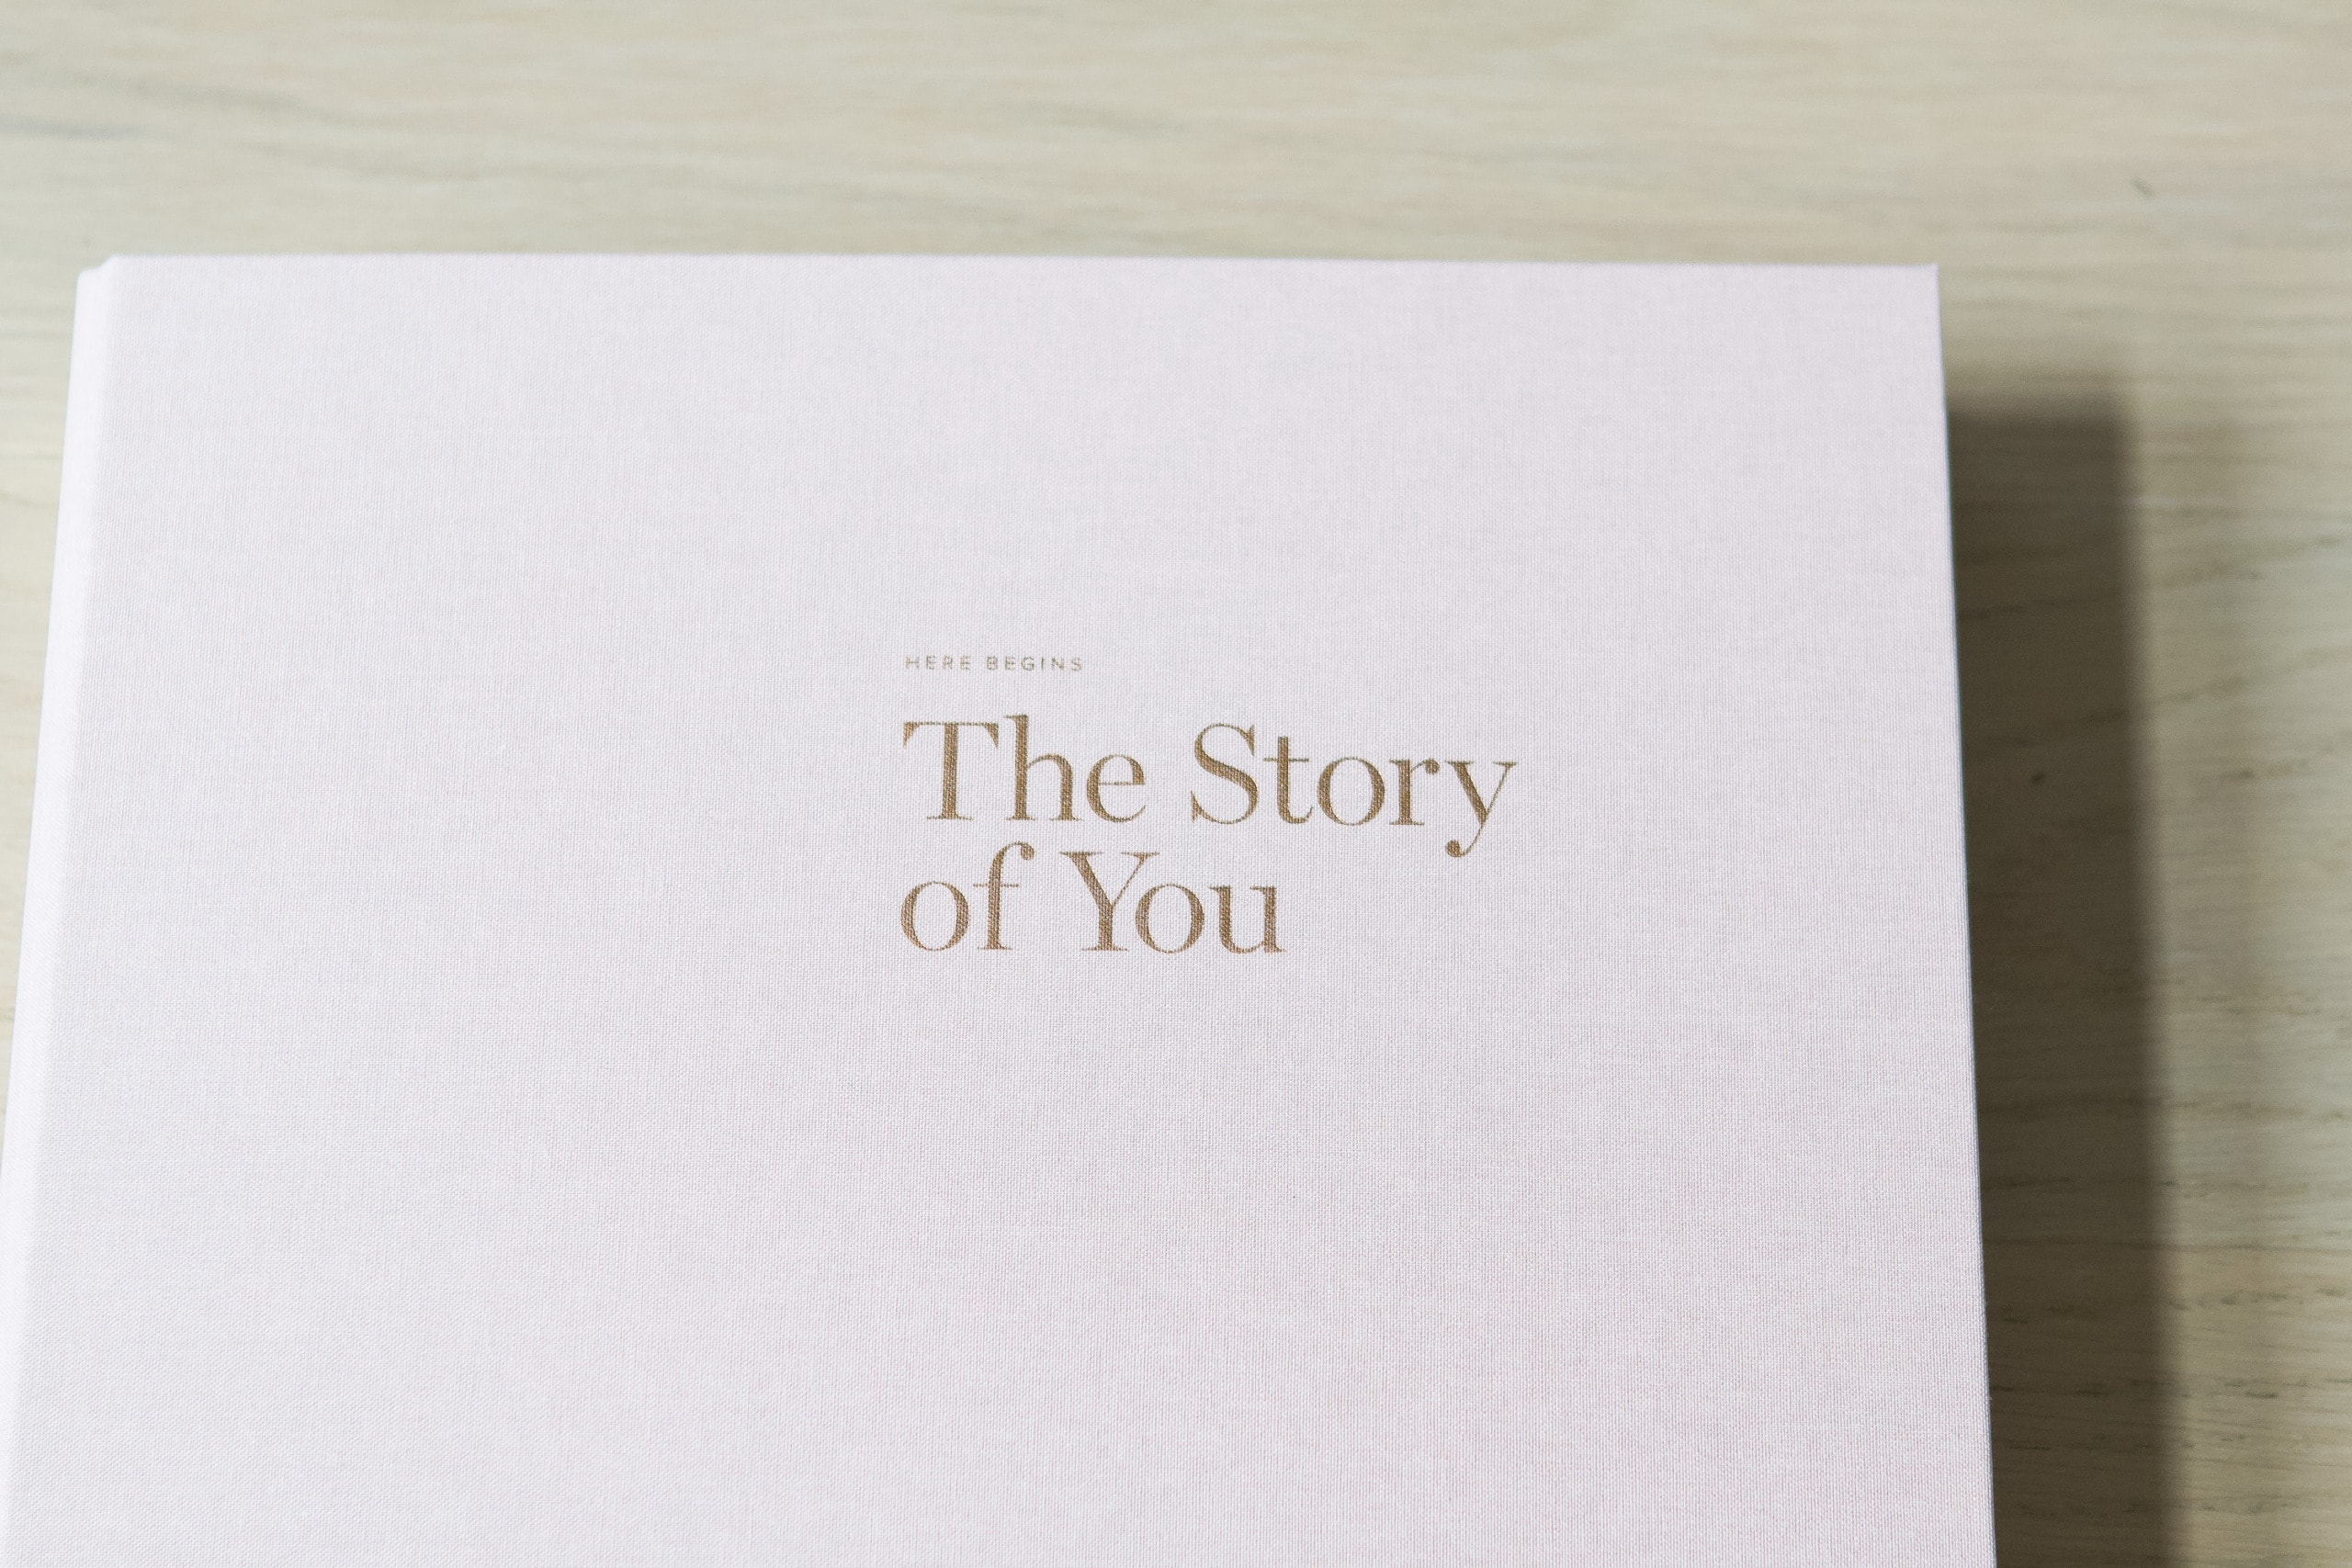 The story of you